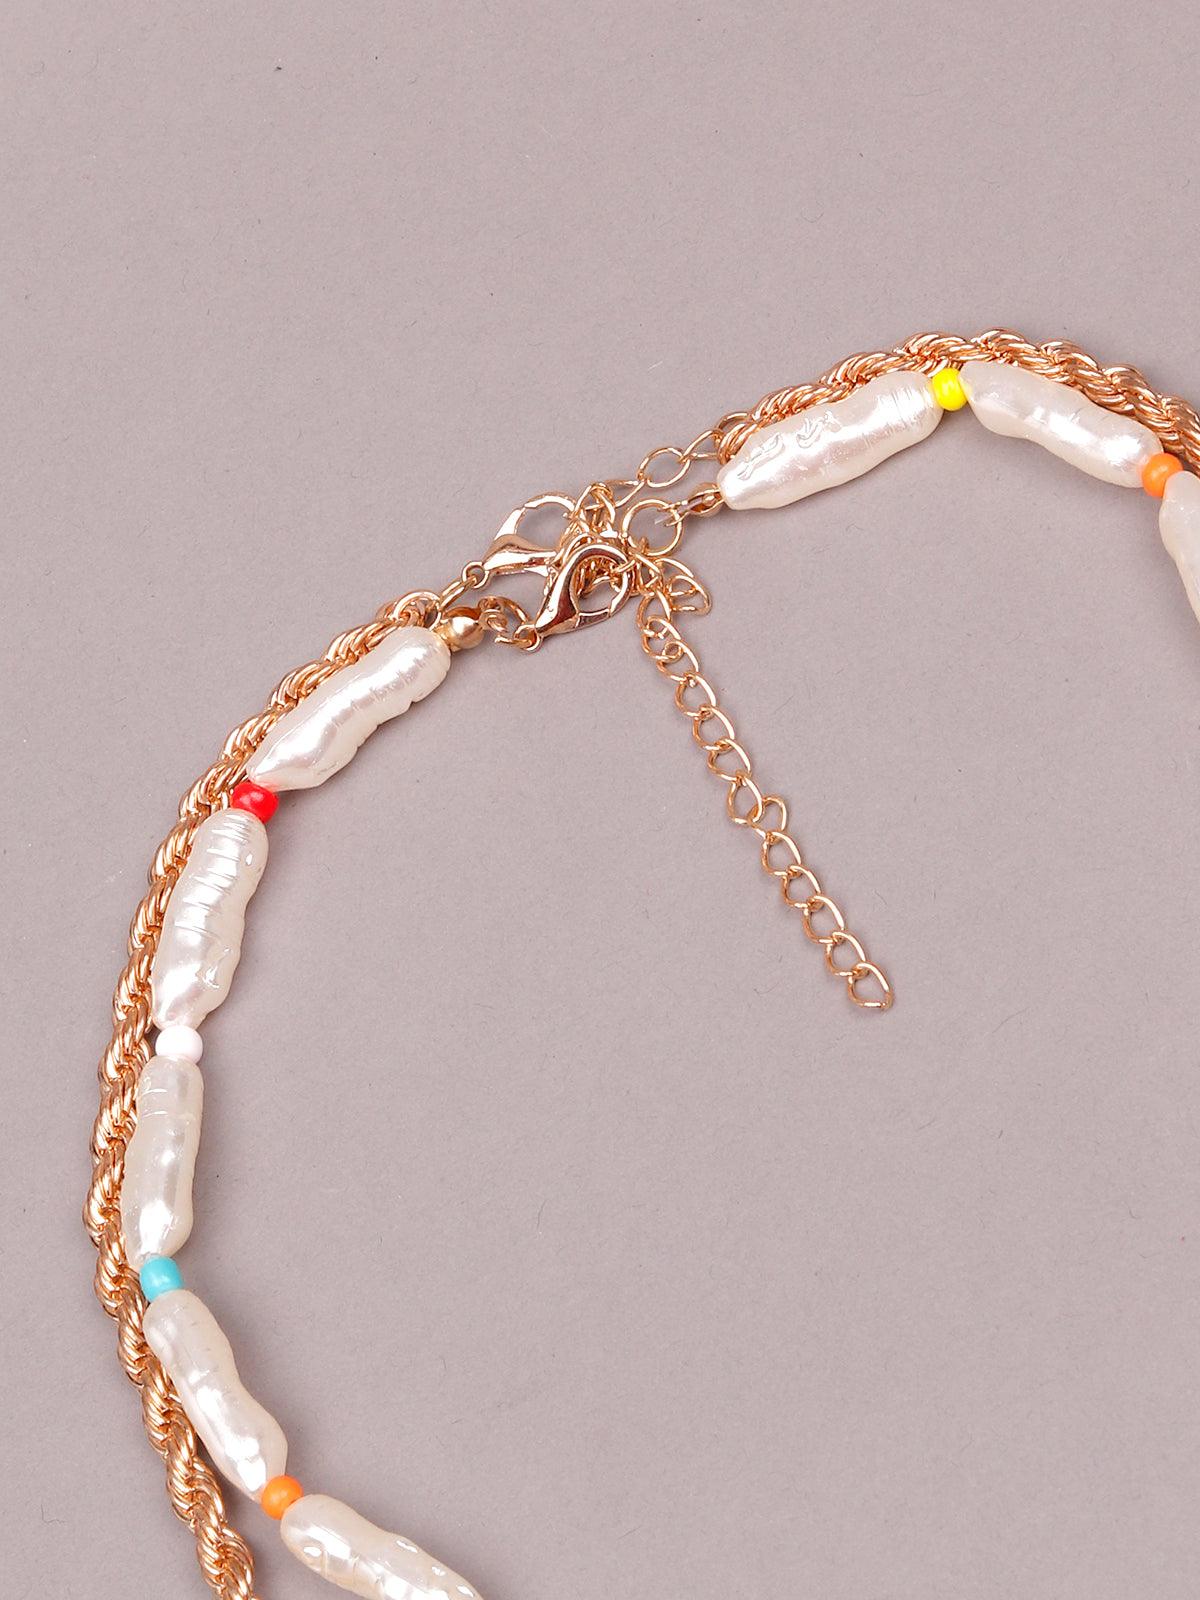 Women's Gold And White Layered Necklace - Odette